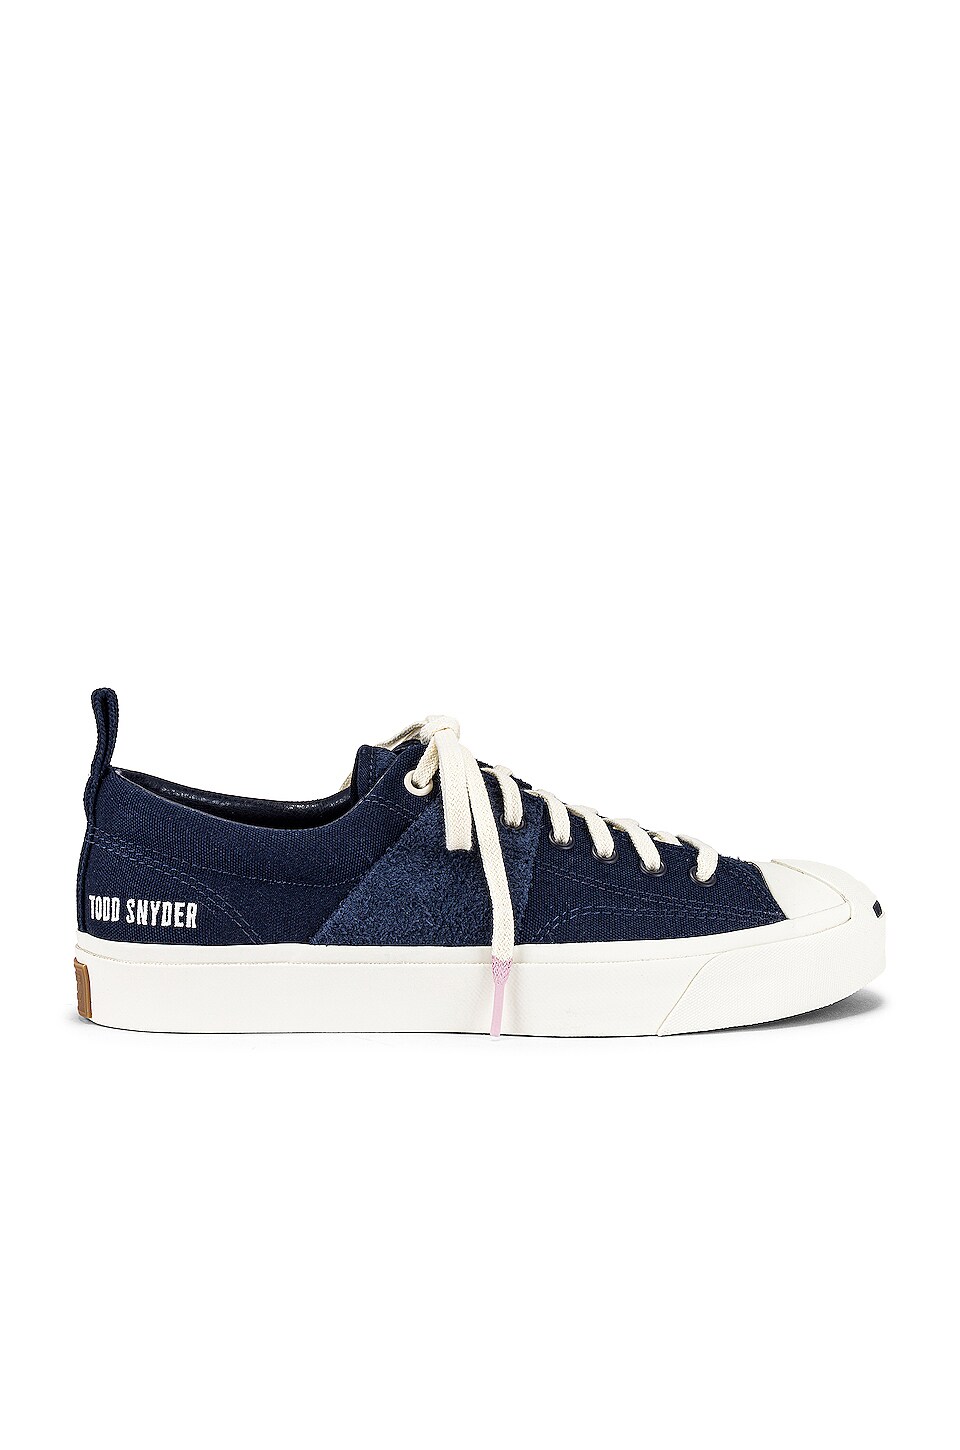 Converse Todd Snyder Jack Purcell Obsidian